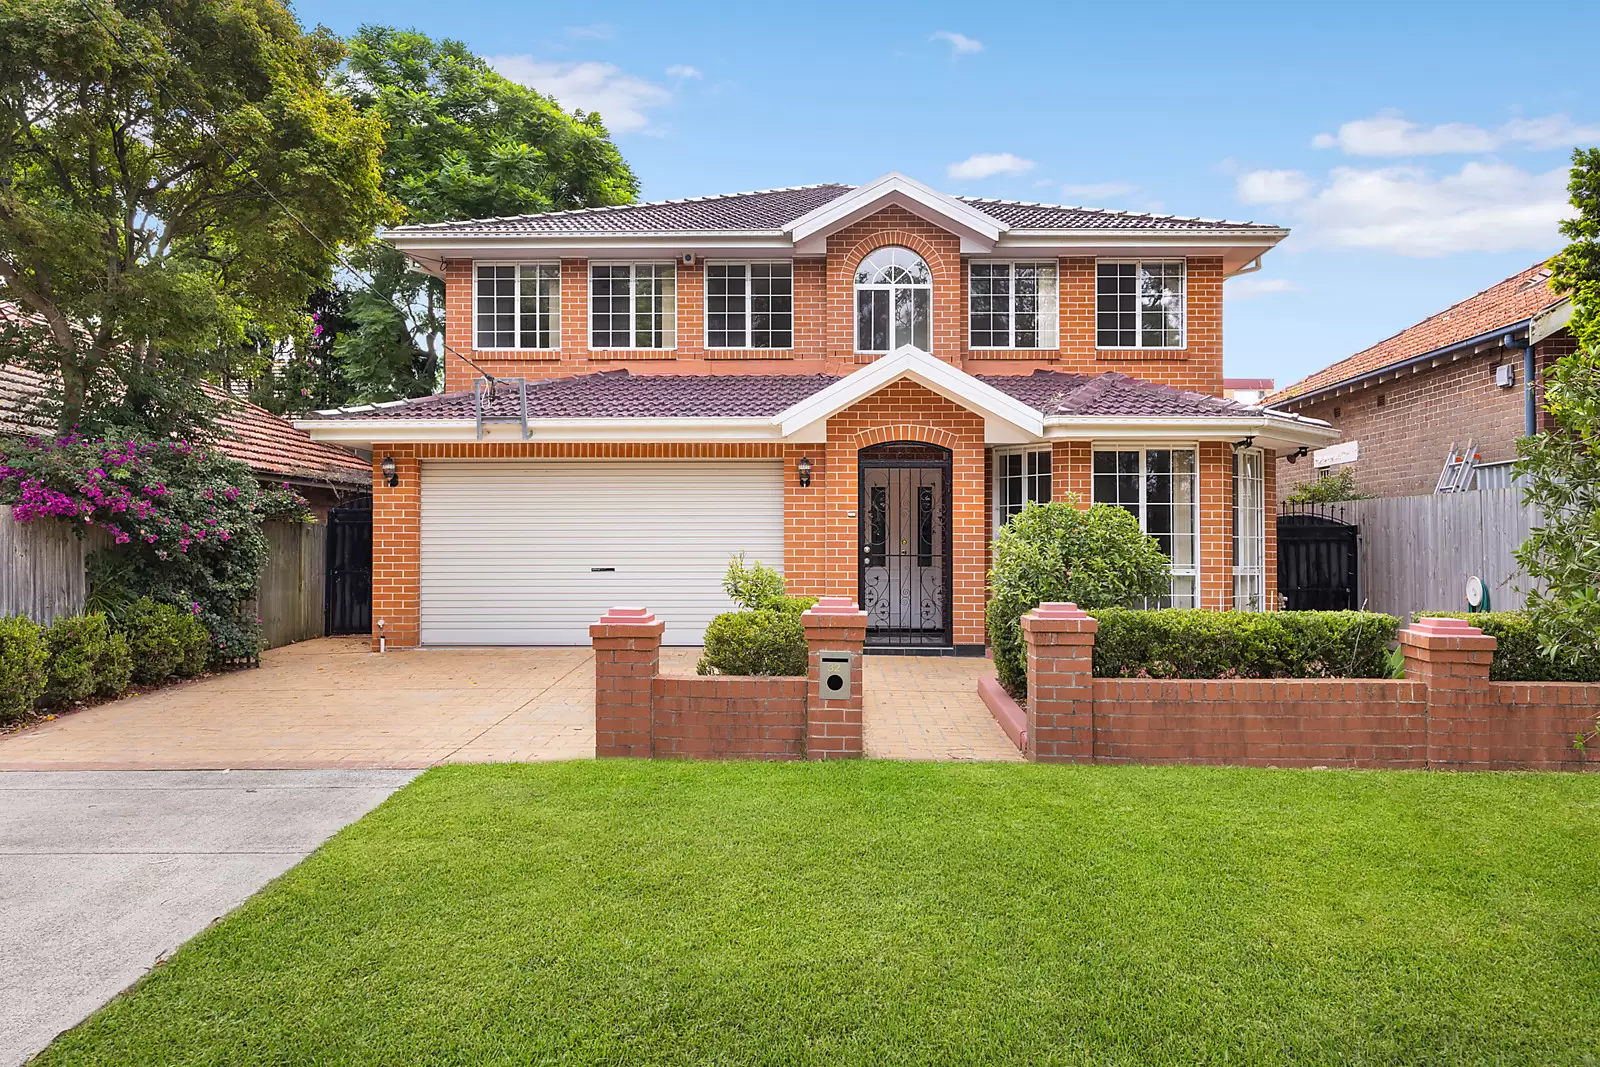 Photo #3: 32 Percival Street, Maroubra - Auction by Sydney Sotheby's International Realty